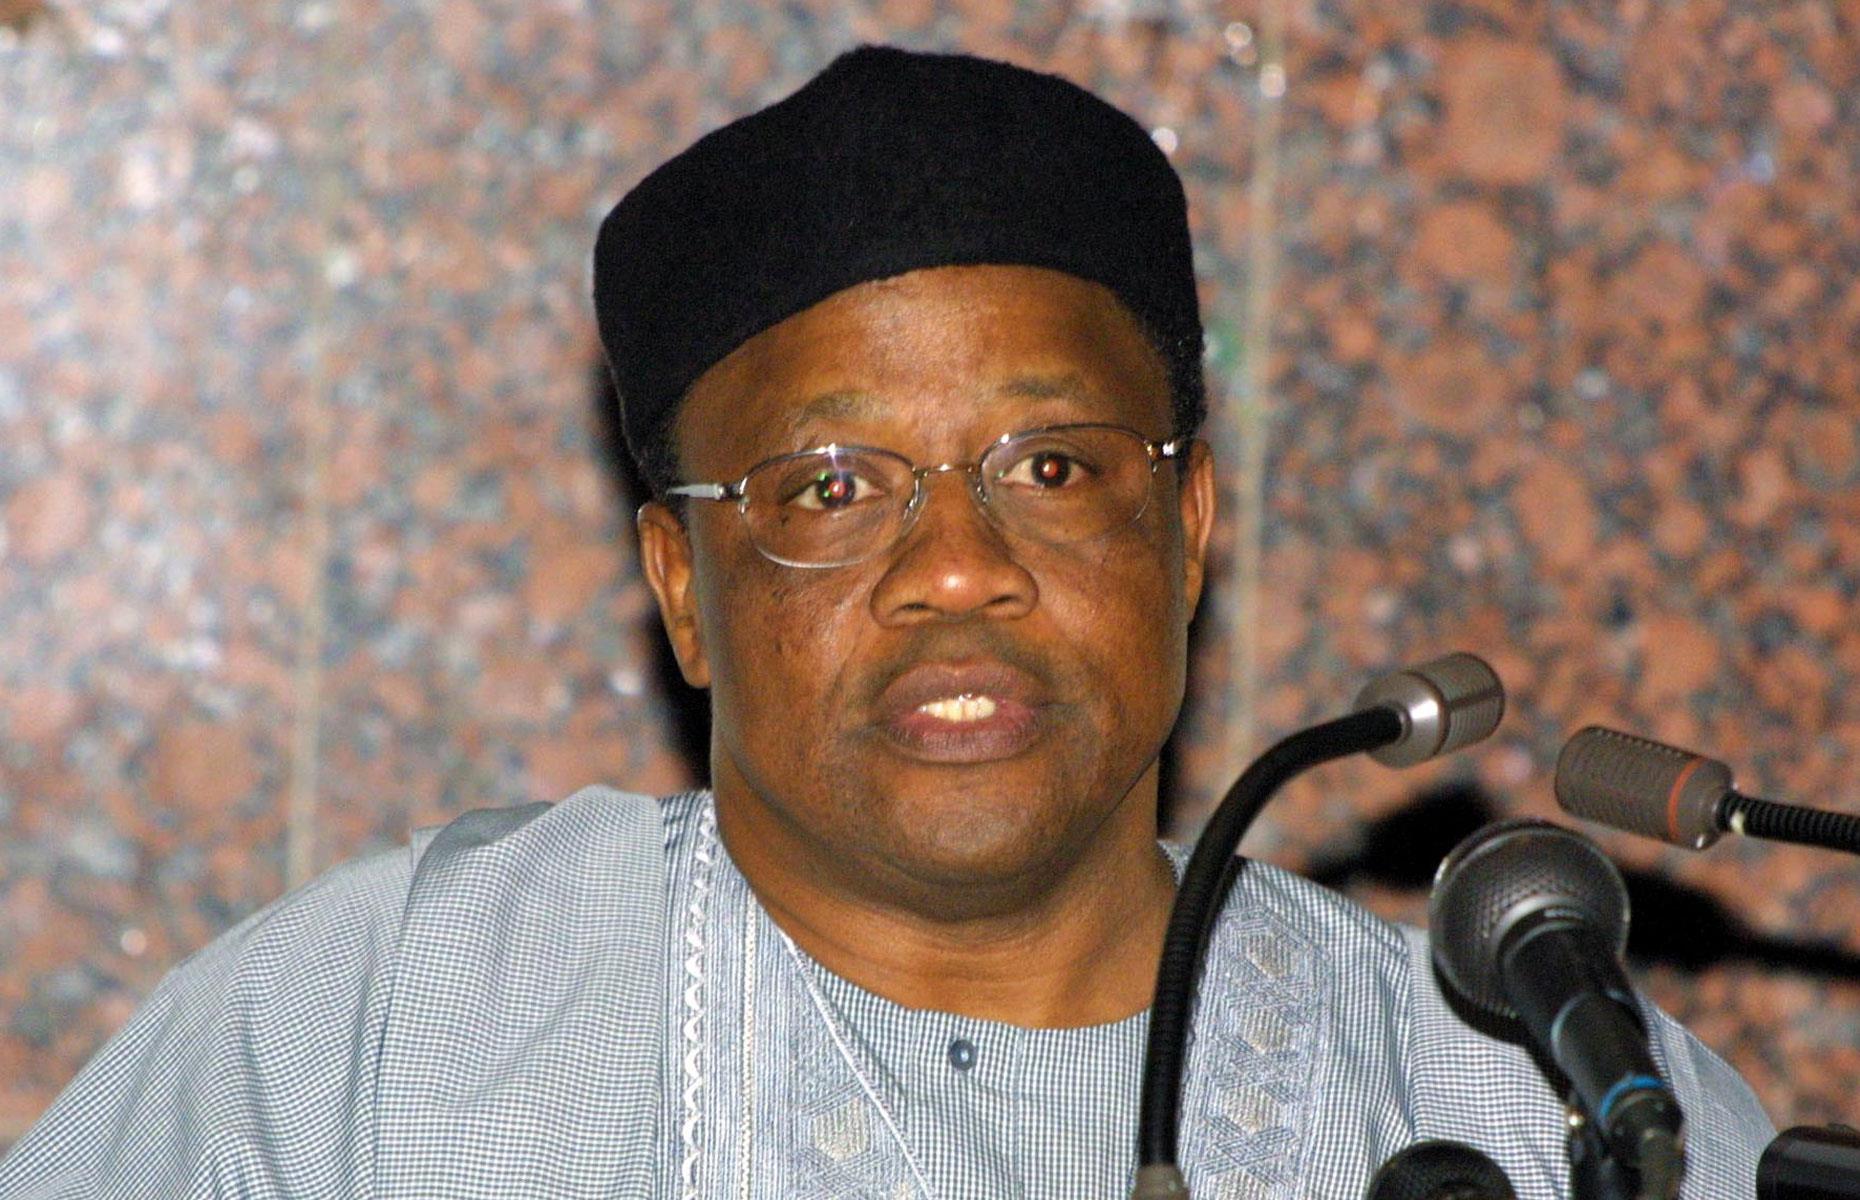 <p>Another Nigerian leader who appropriated billions of the nation's money, Ibrahim Babangida was president of the country from 1985 to 1993. The shameless military general is believed to have laundered $12.4 billion off the back of Nigeria's enormous oil windfall during the 1992 Gulf War. When adjusted for inflation, that's $22.7 billion today.</p>